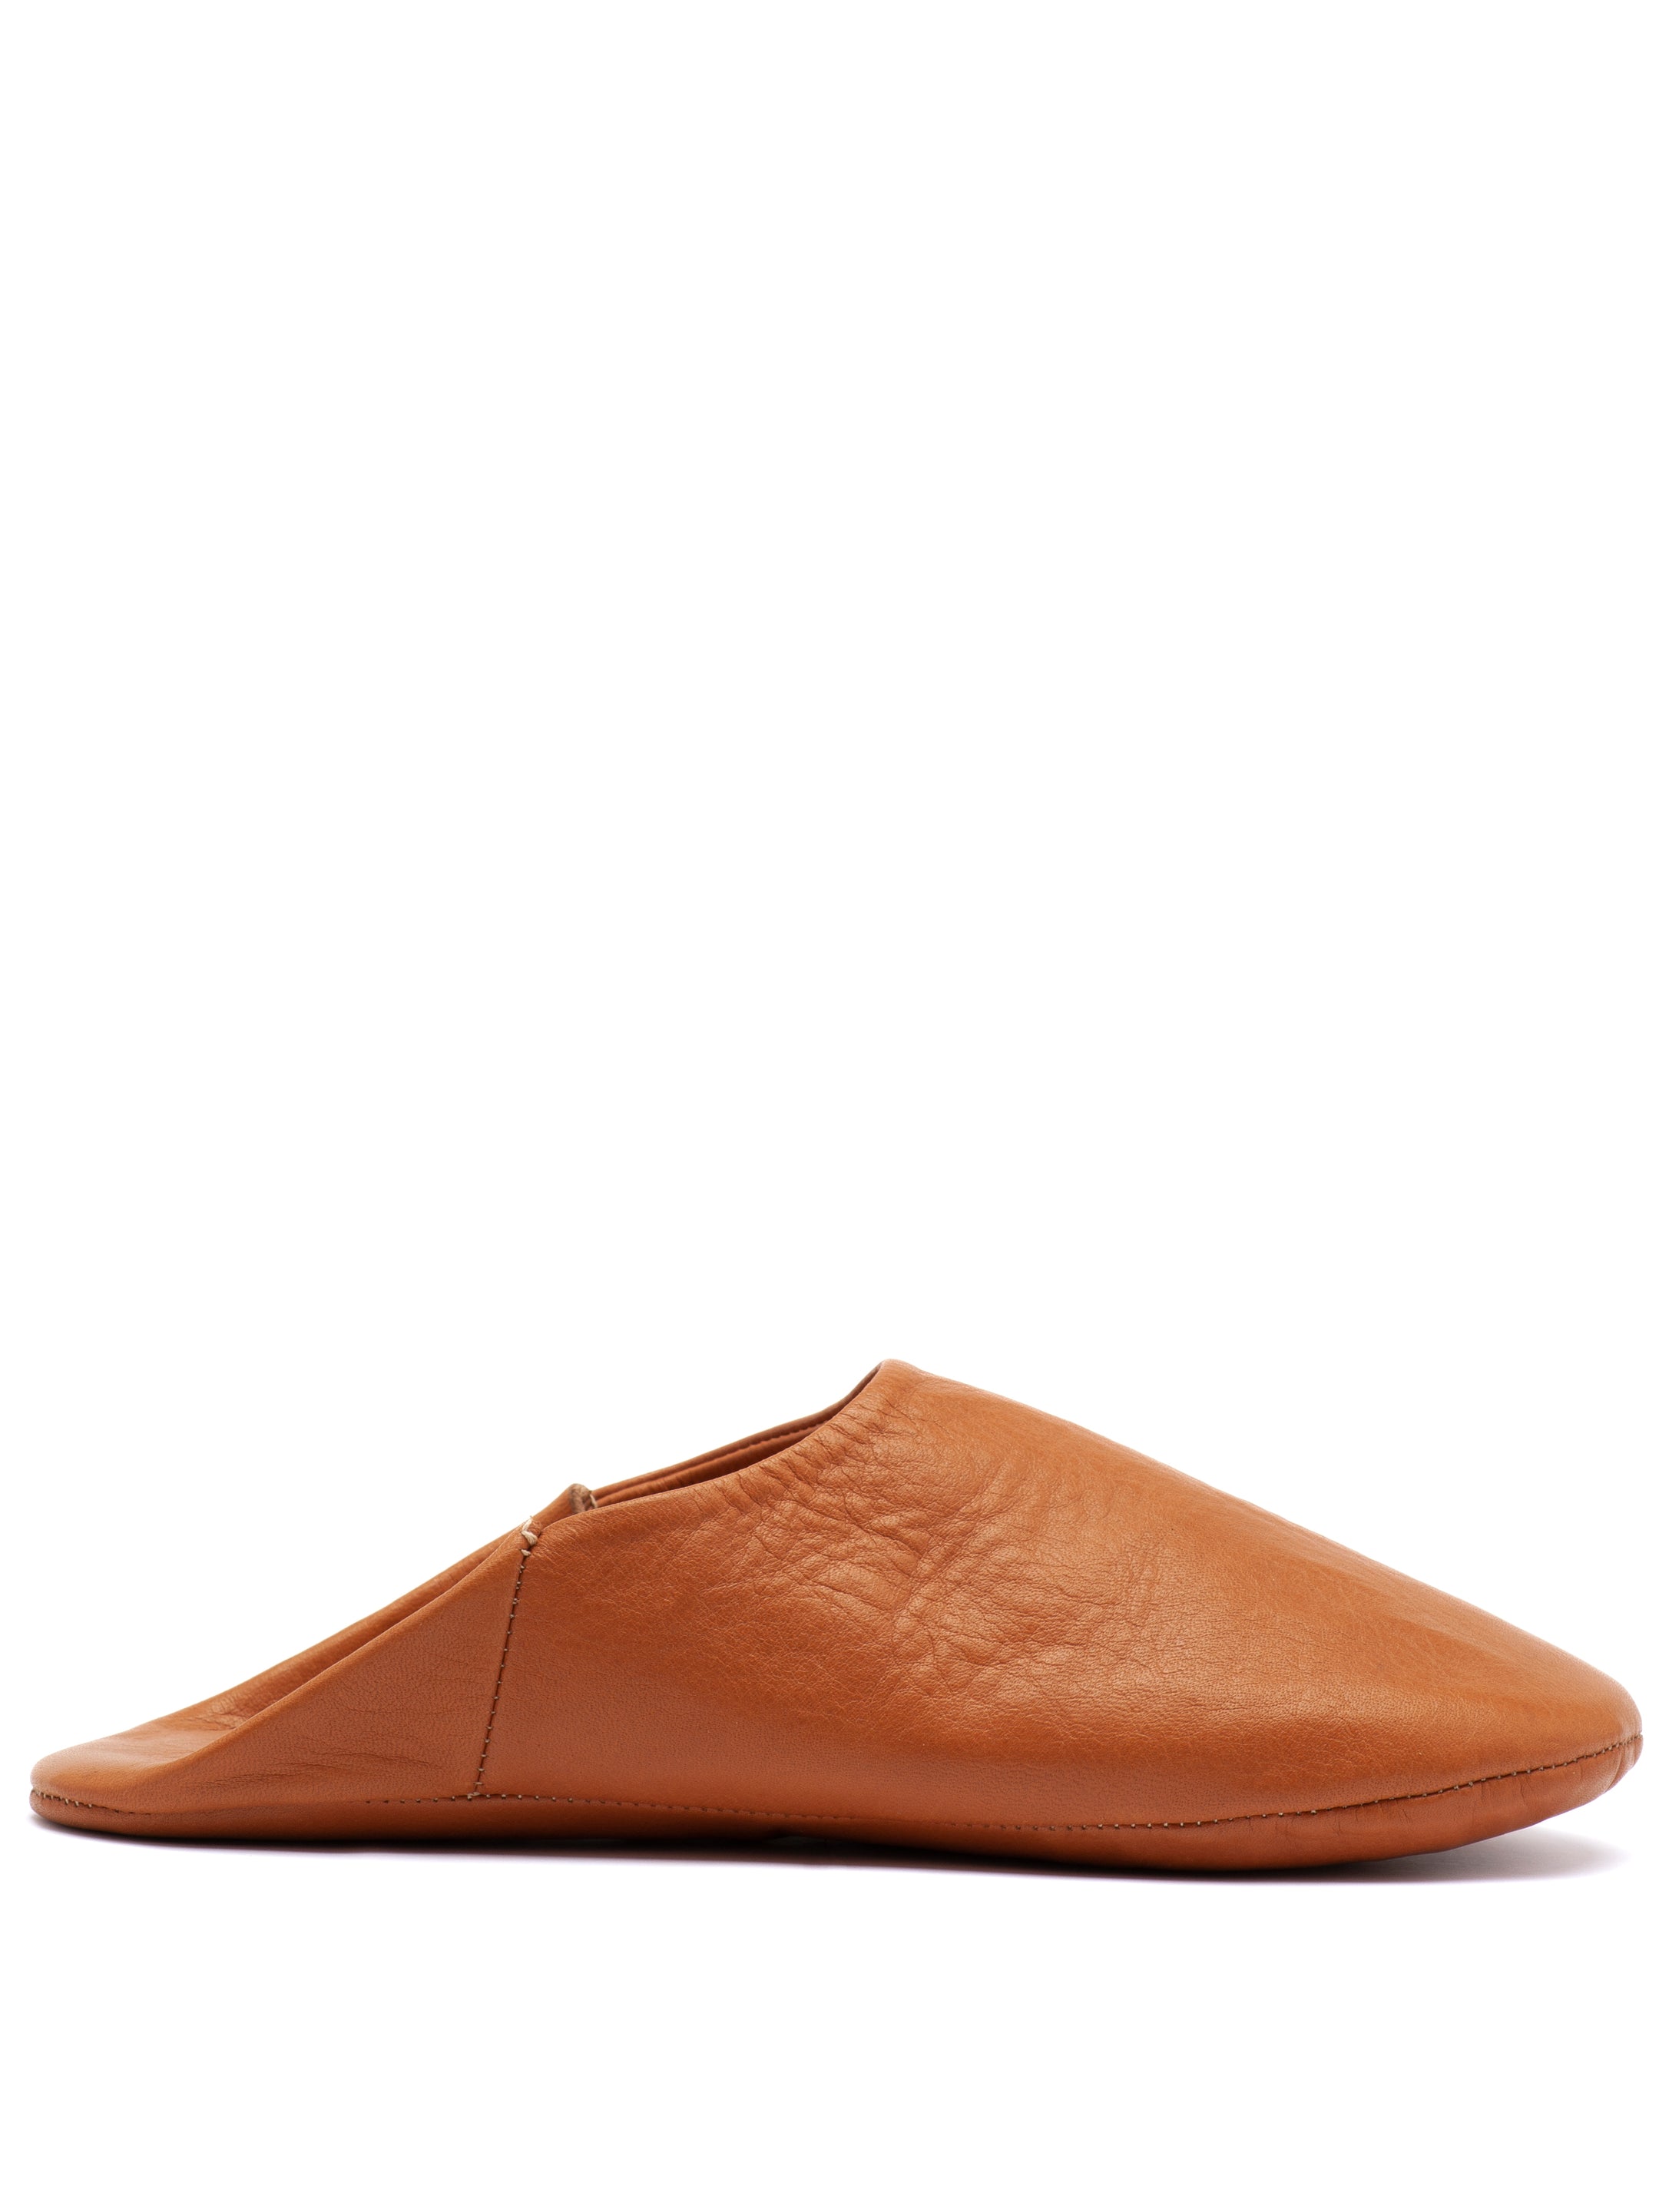 Russet Rhapsody - Leather Slippers